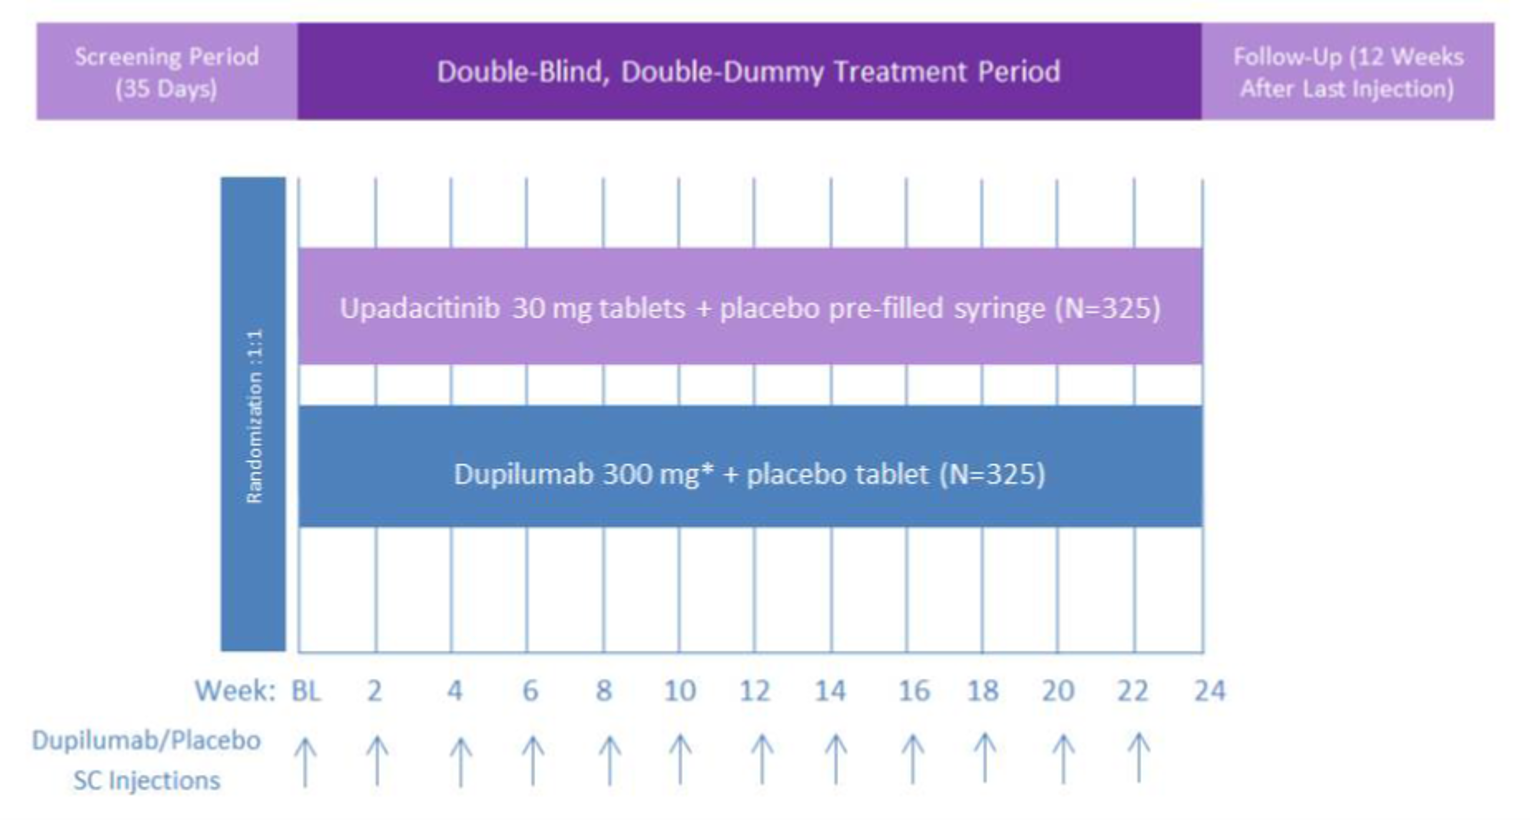 The figure depicts the Heads Up study starting with randomization after a screening period to upadacitinib 30 mg or dupilumab 300 mg during a double-dummy treatment period.